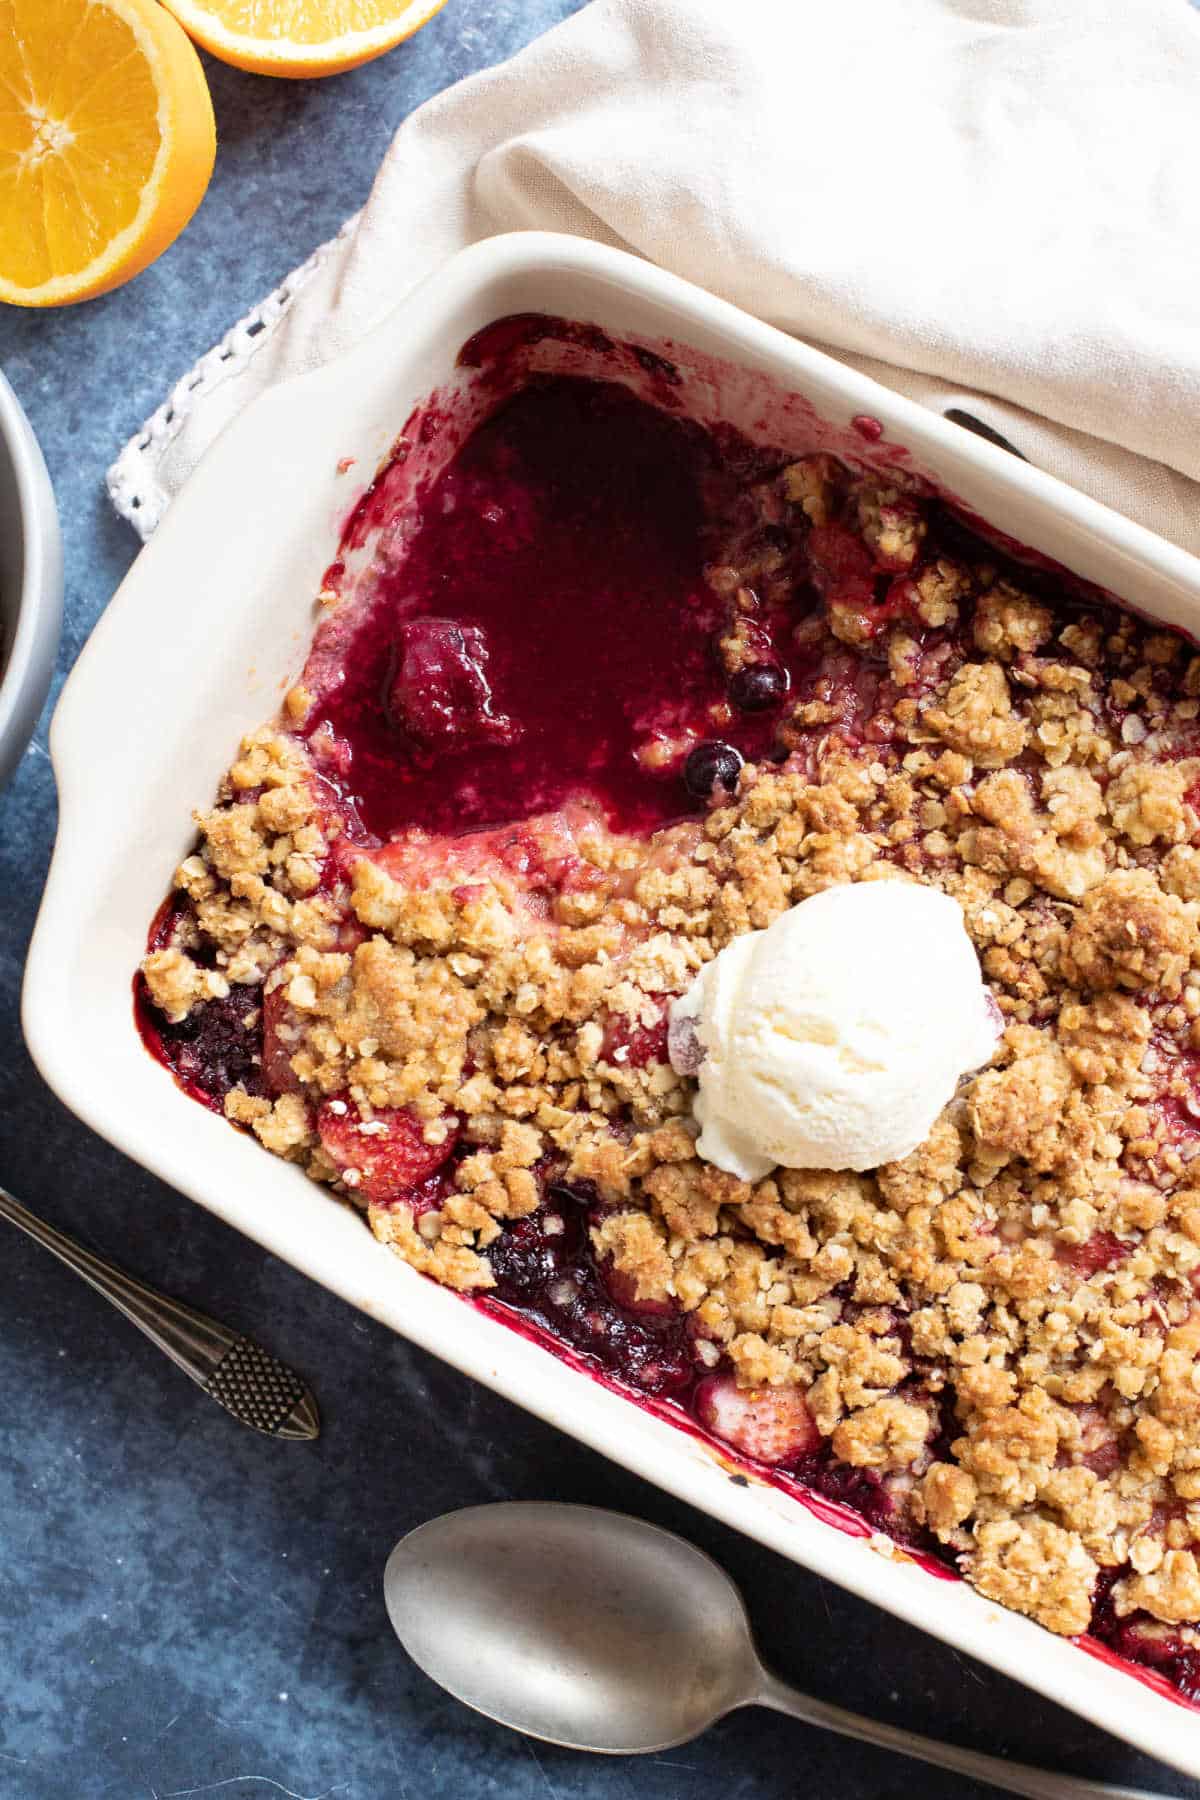 Mixed berry crumble with an oat crumble topping.